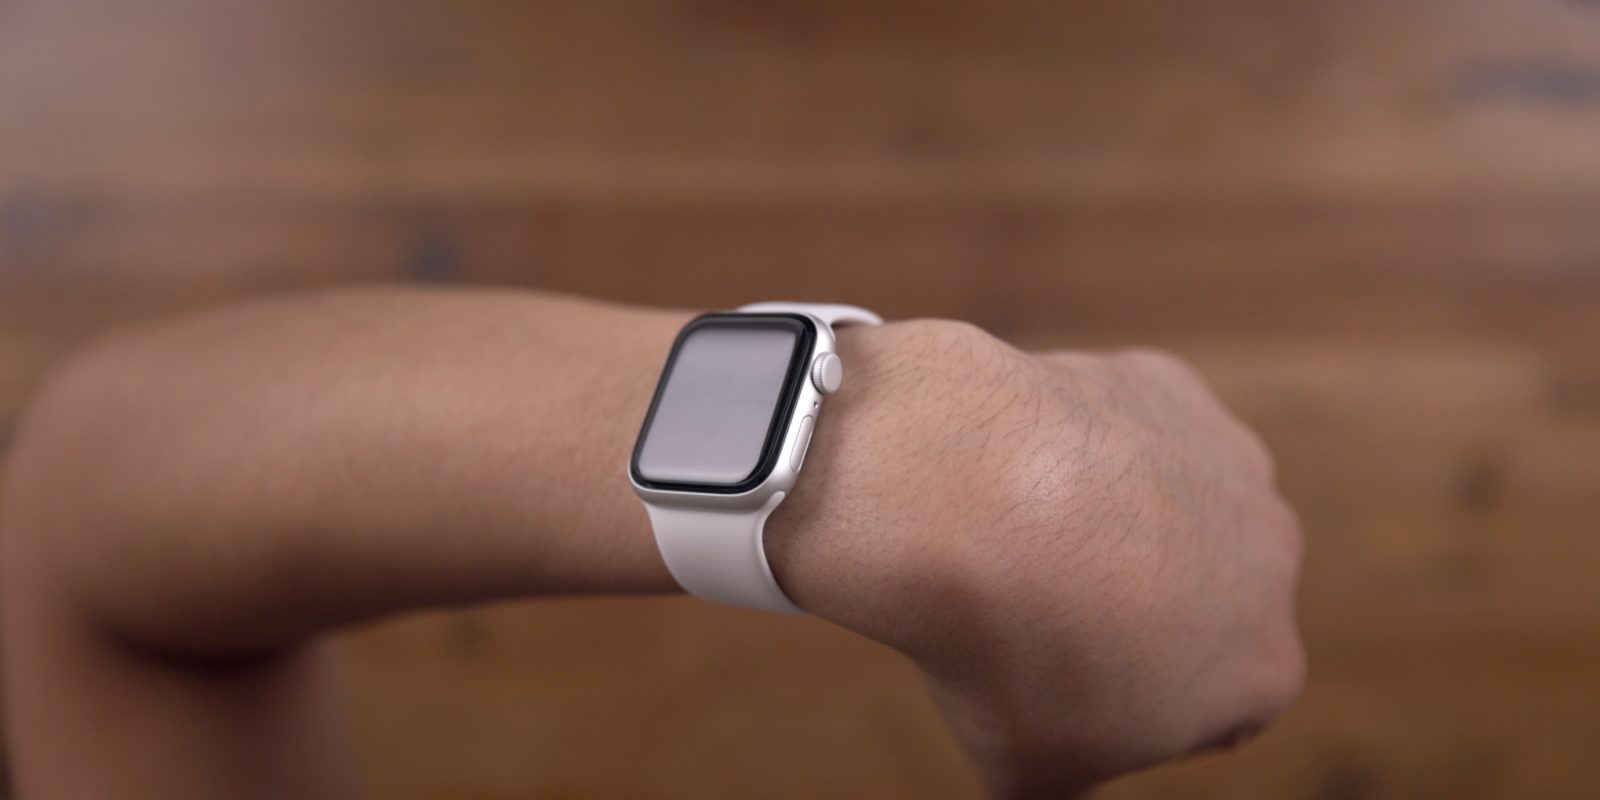 Here are some of the best Apple Watch apps -